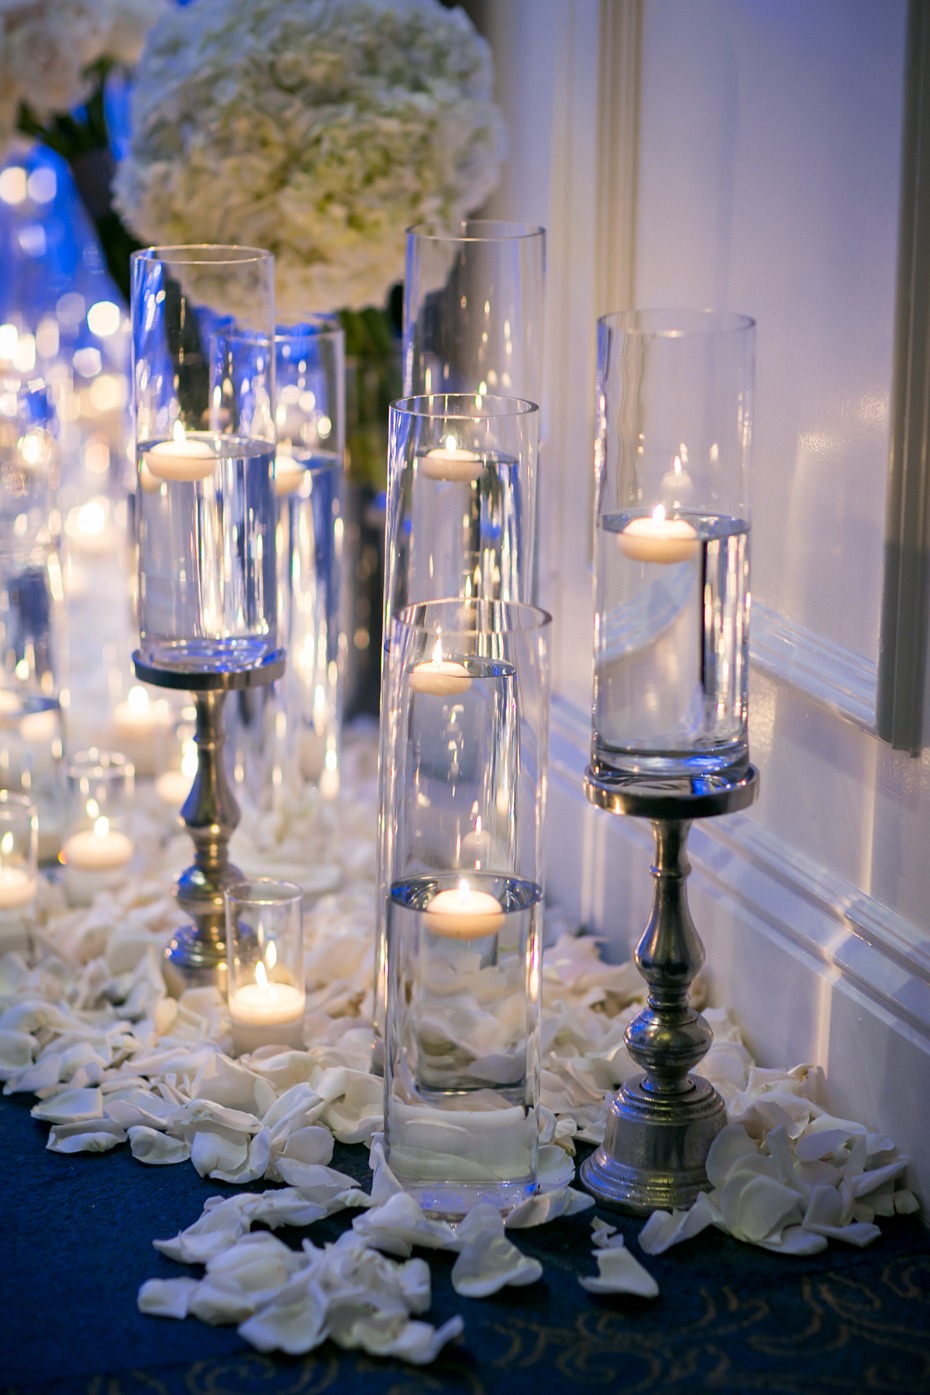 setting the mood with floating candles and oodles of flower petals